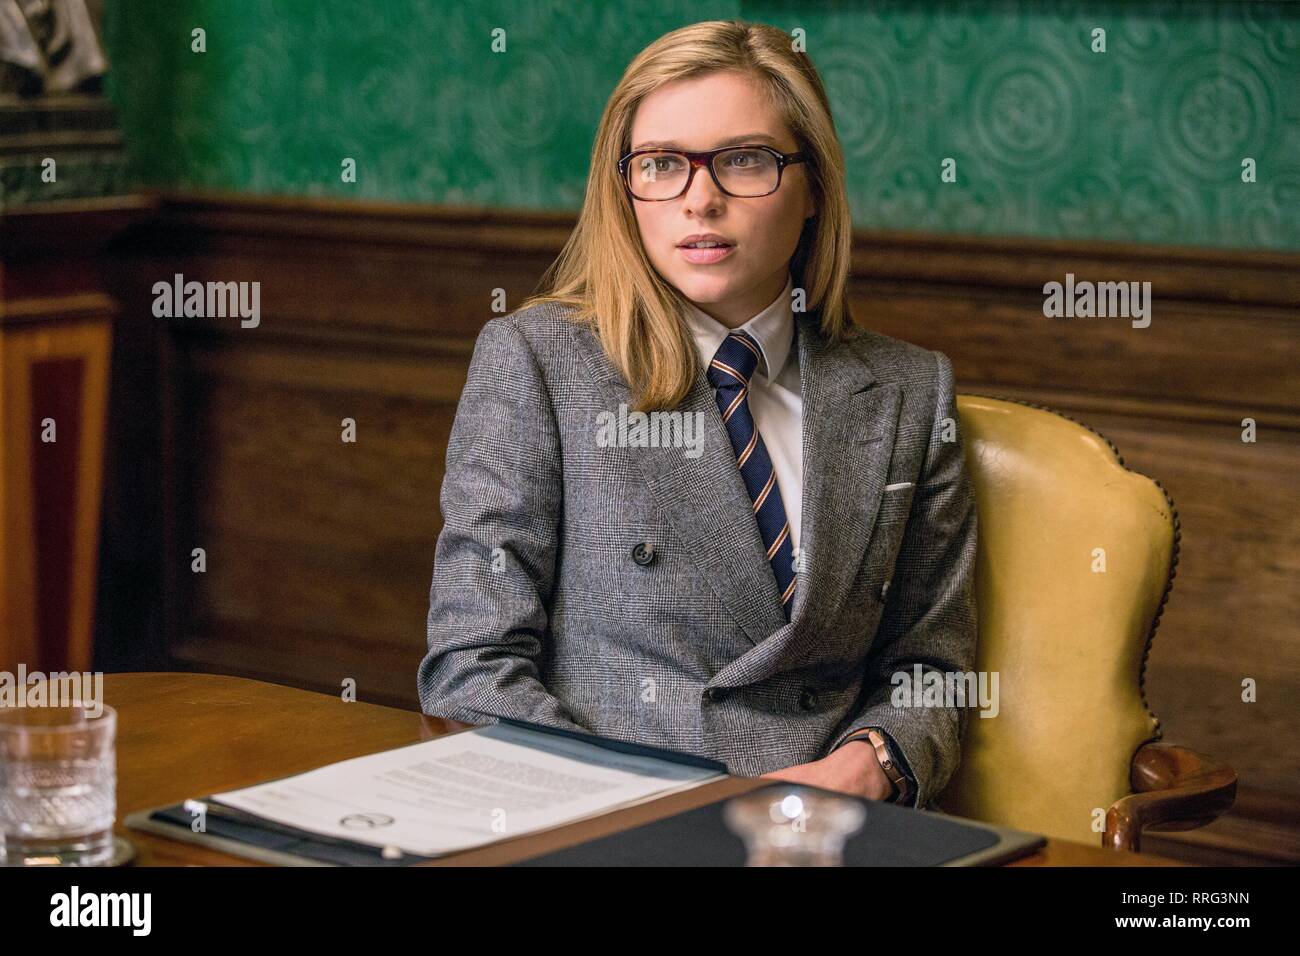 Sophie Cookson Kingsman High Resolution Stock Photography And Images Alamy